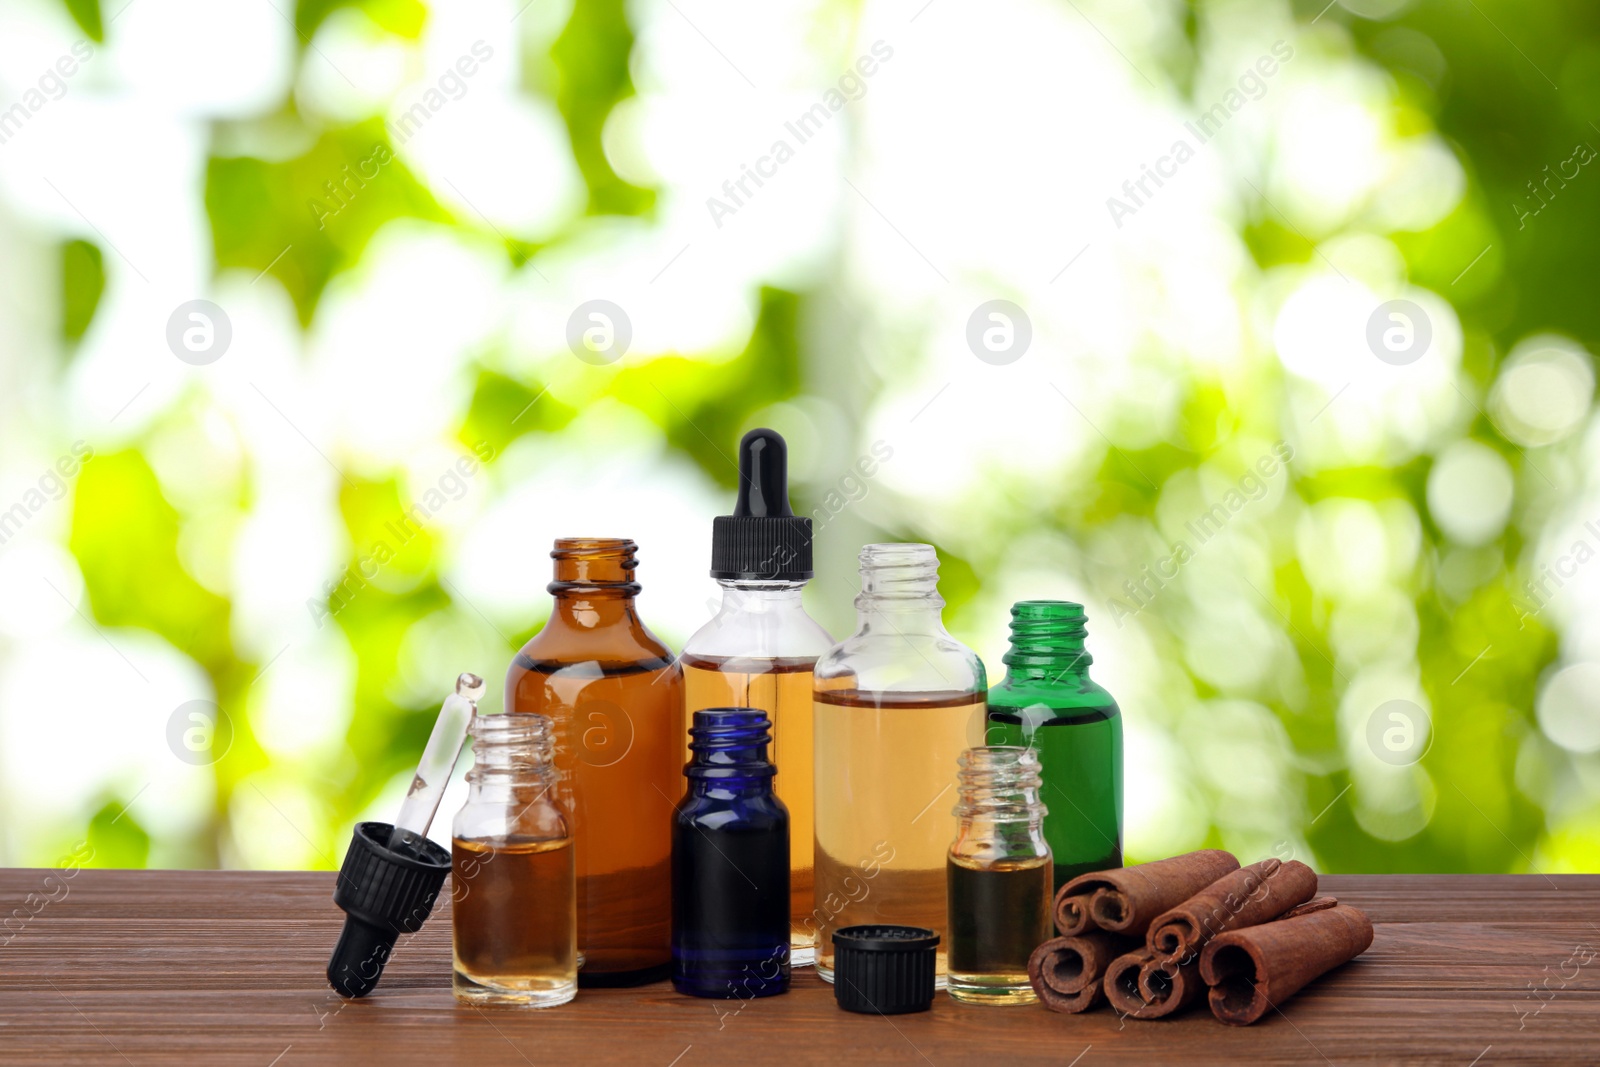 Image of Bottles of essential oils and cinnamon sticks on wooden table against blurred background